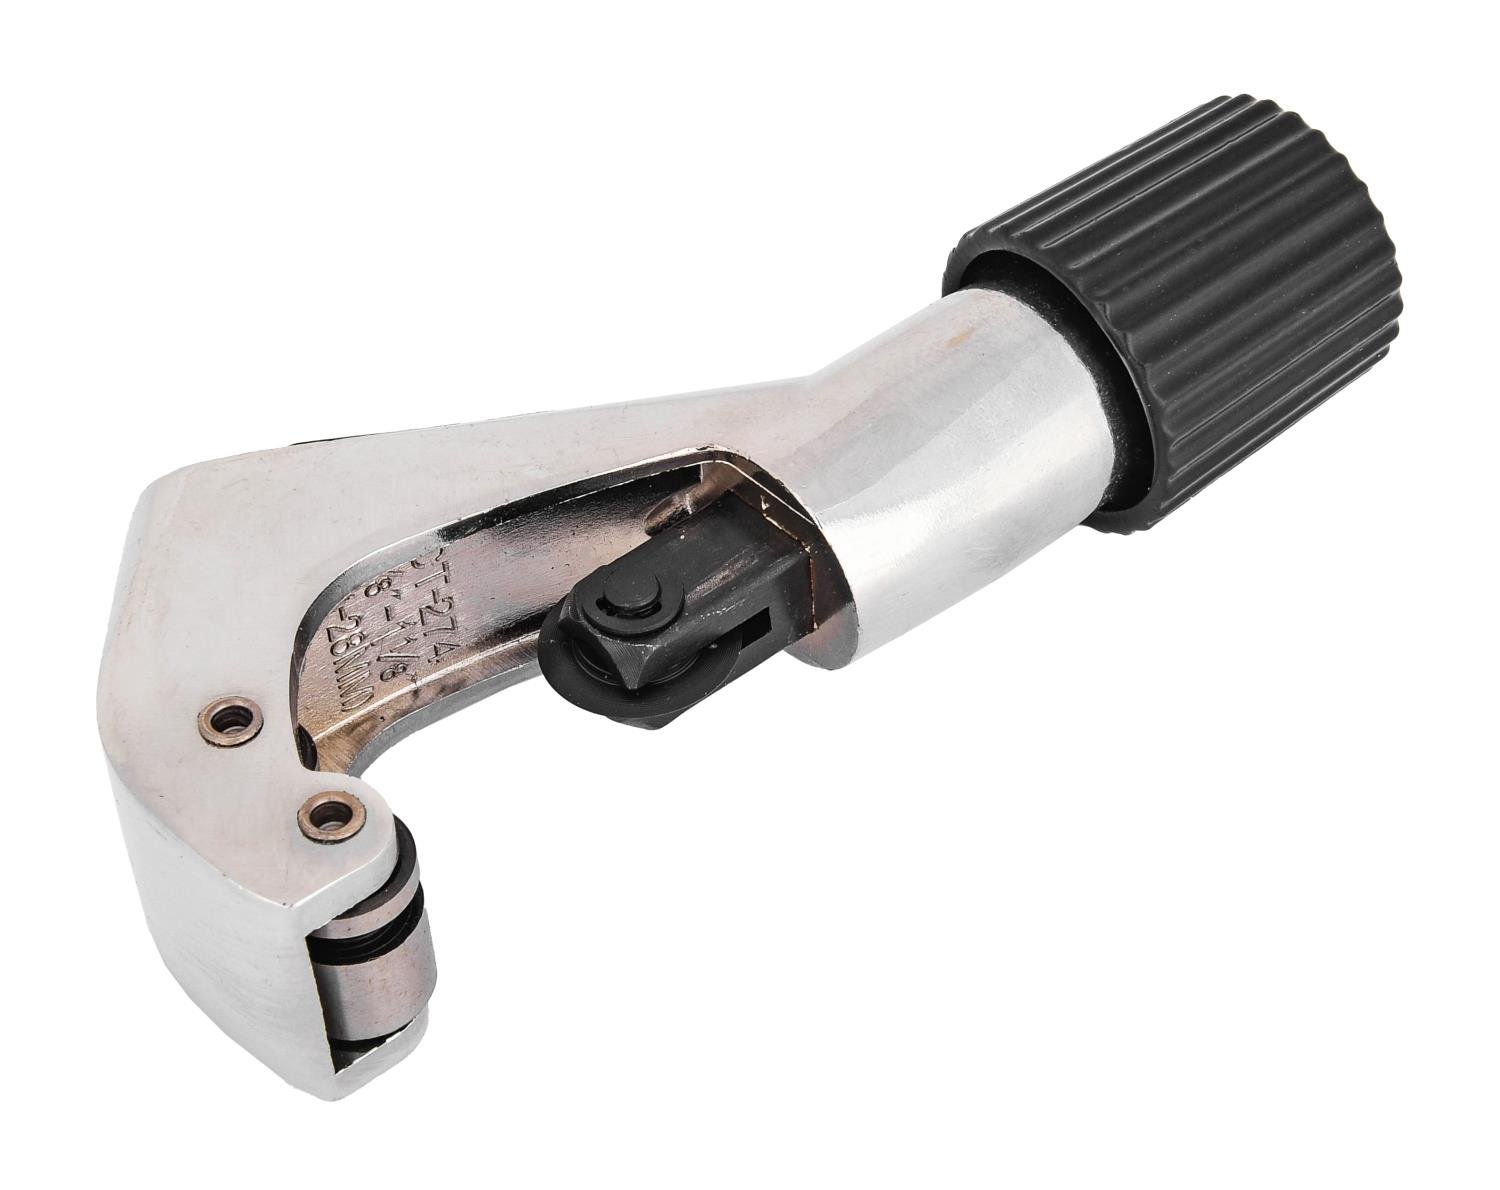 Pro Style Tubing Cutter For 1/8 in.-1 1/8